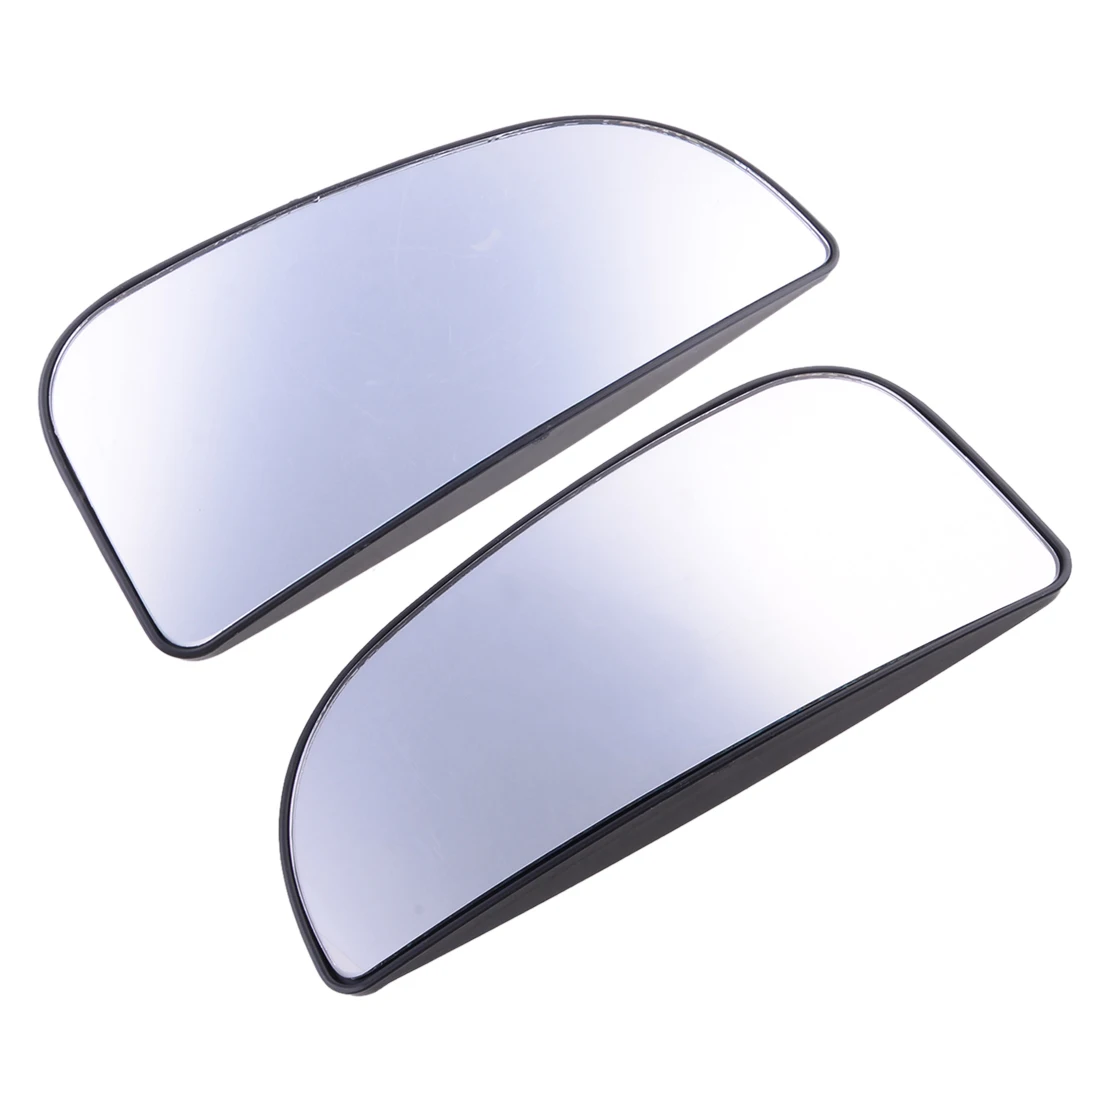 

68067730AA 1 Pair Front Tow Mirror Side Lower Rearview Spotter Glass Fit for Dodge Ram 1500 2500 3500 4500 5500 2020-2011 2010